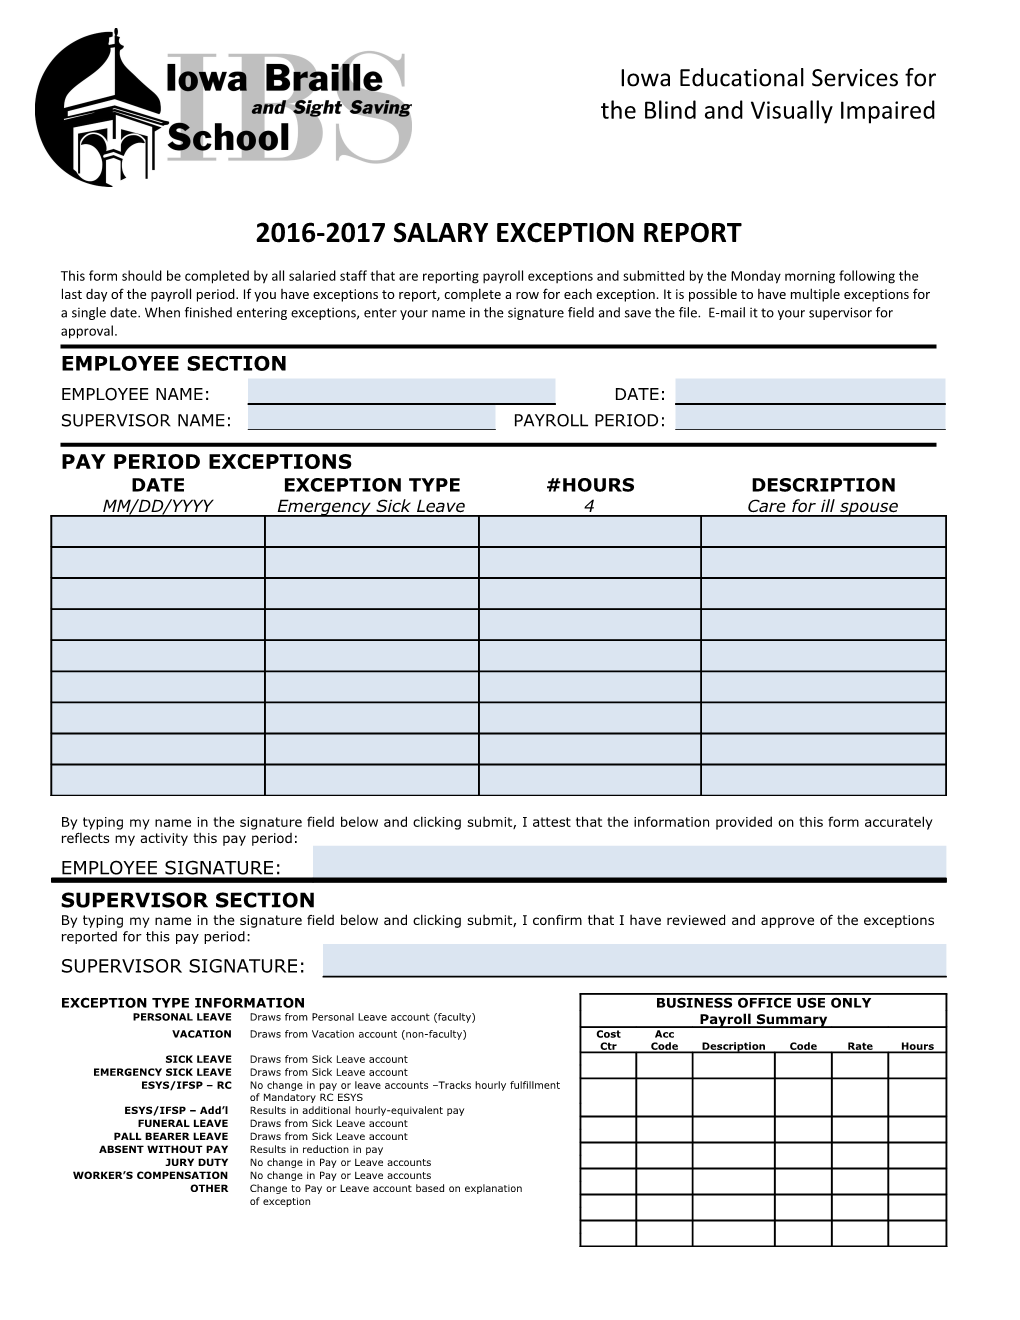 2016-2017 Salary Exception Report